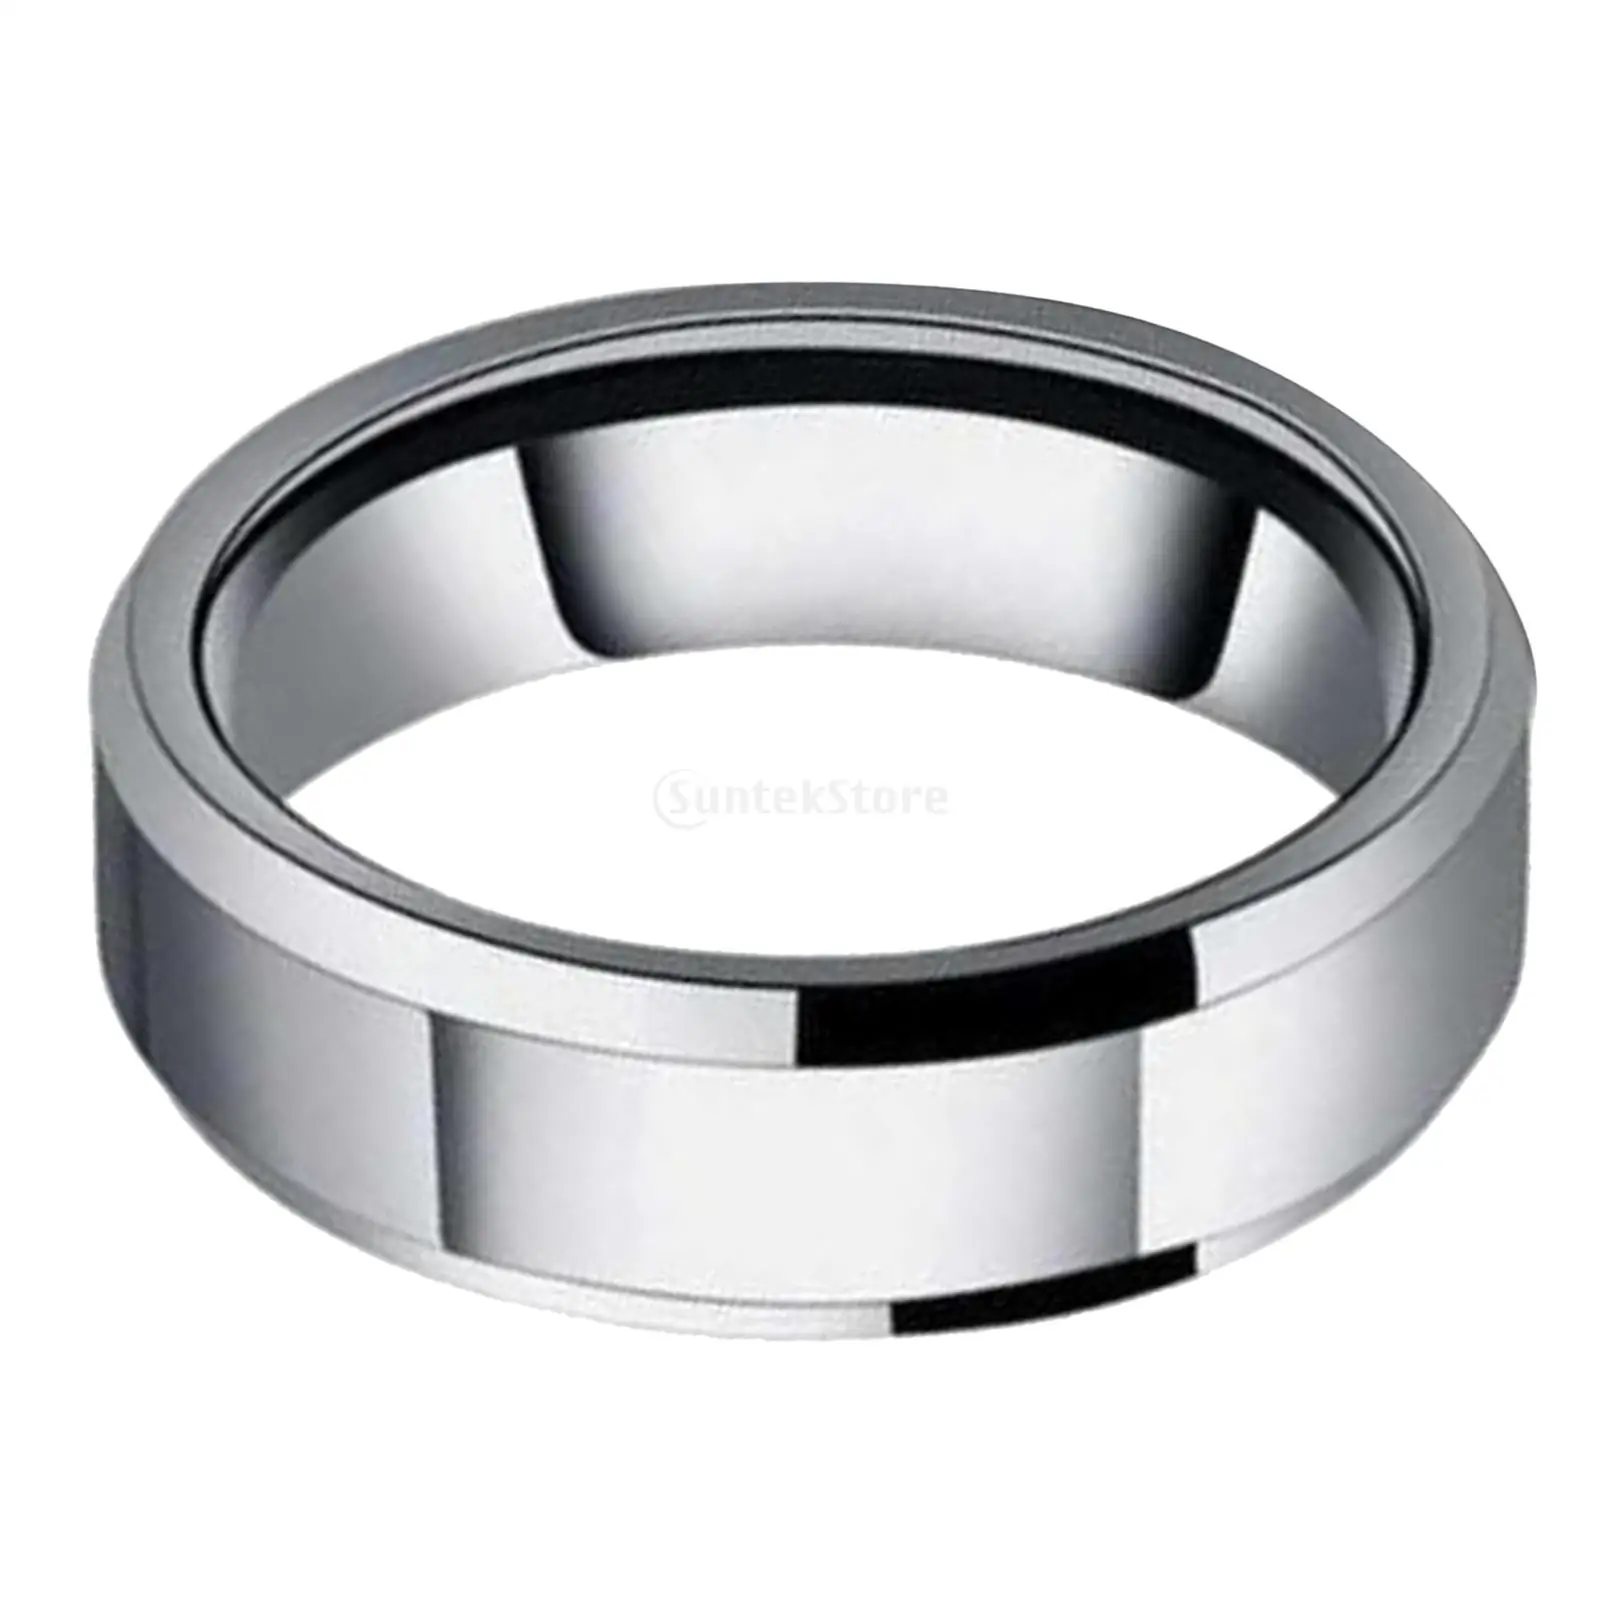 Details about   Magnetic PK Ring Magic Tricks Invisible Close Up Gimmick Prop for Hobbyist 